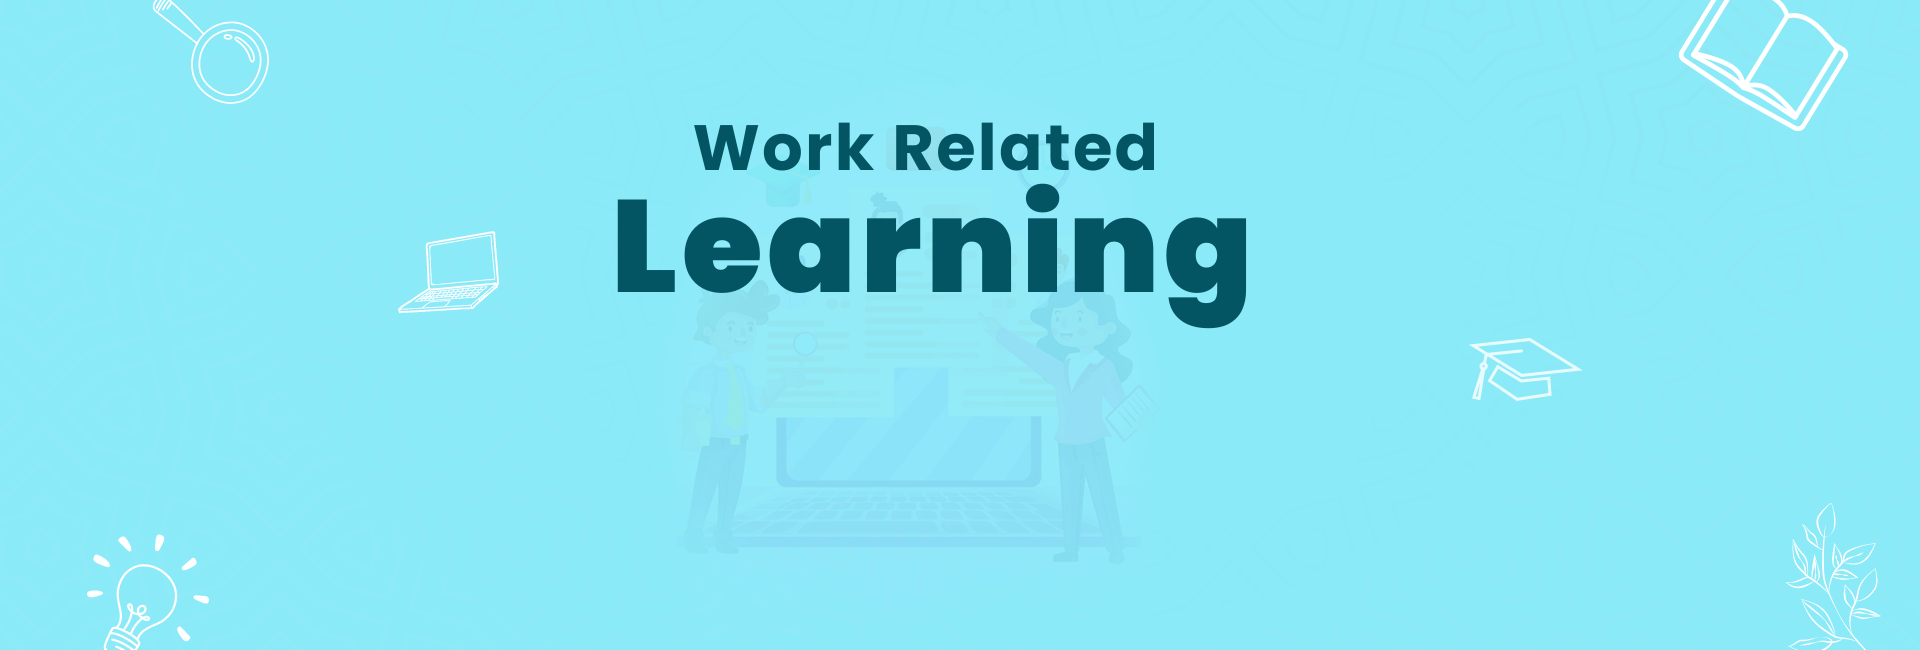  Work Related Learning Cover Image